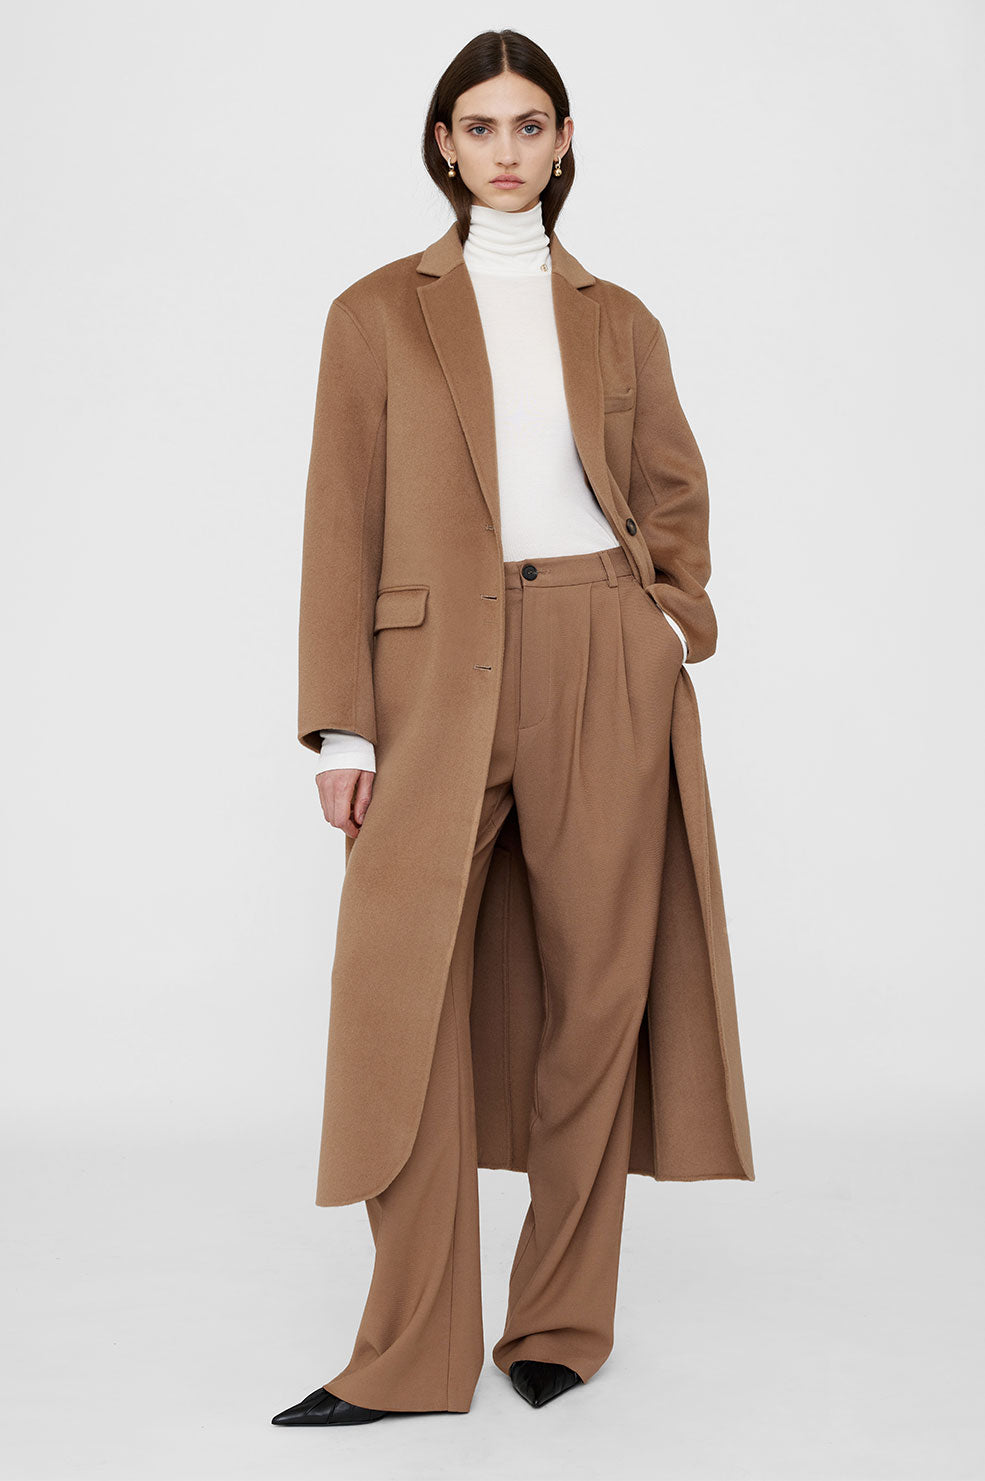 ANINE BING Carrie Pant - Camel Twill